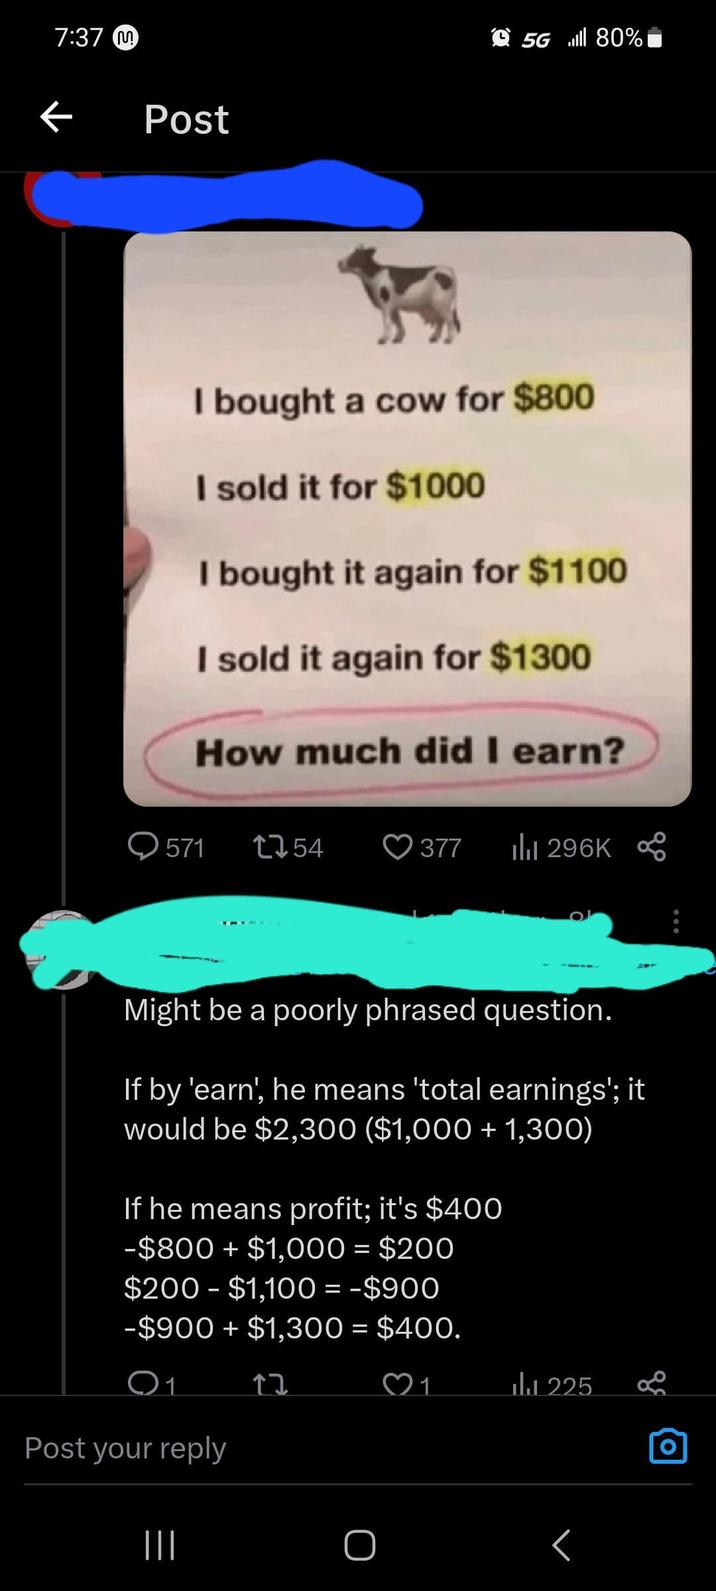 screenshot - M Post 5G 80% I bought a cow for $800 I sold it for $1000 I bought it again for $1100 I sold it again for $1300 How much did I earn? 571 1754 377 ili Might be a poorly phrased question. If by 'earn', he means 'total earnings'; it would be $2,